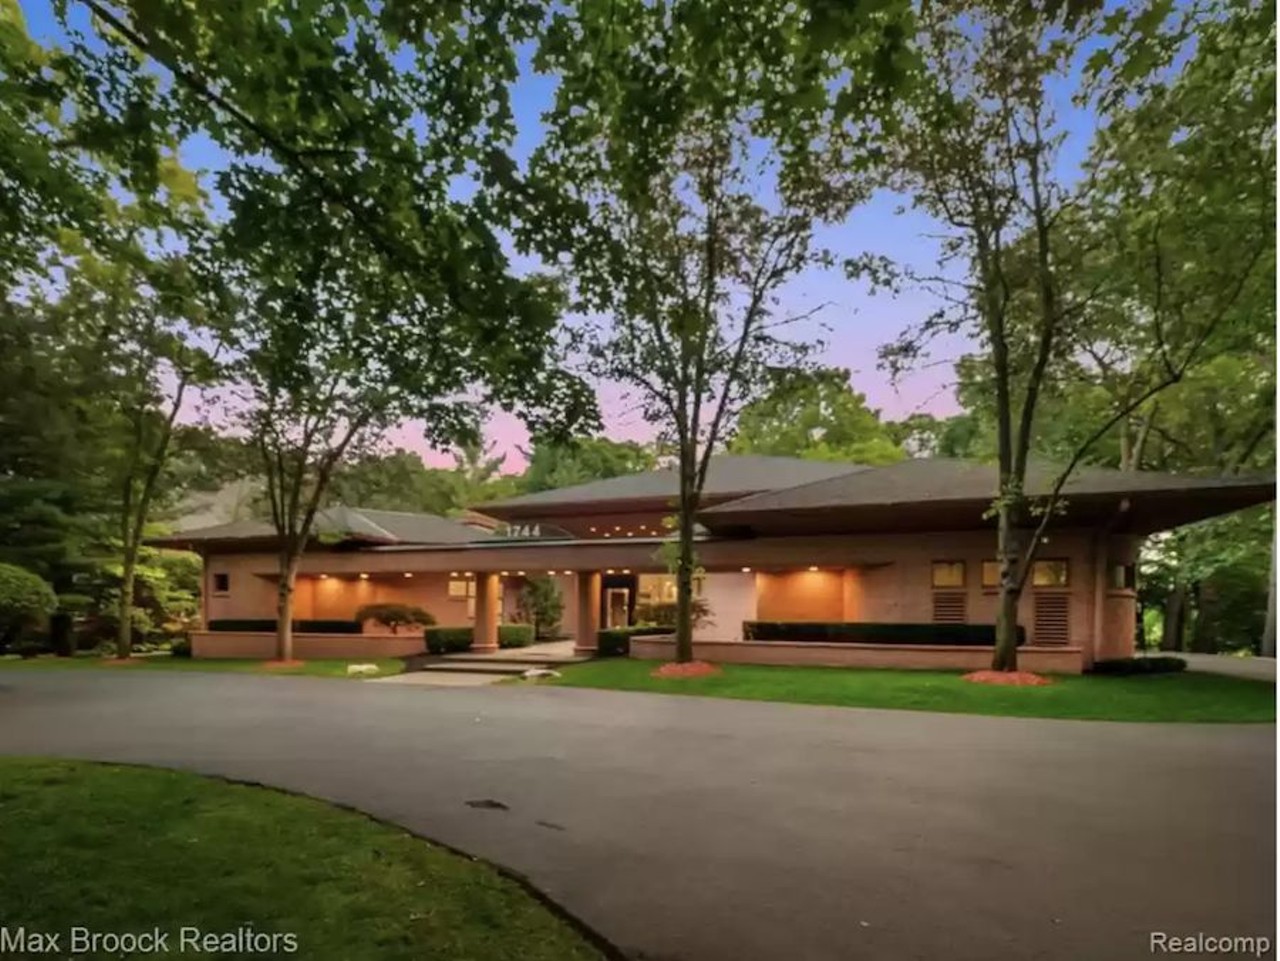 This $2.75 million mansion in Bloomfield Hills is a rose-colored showstopper